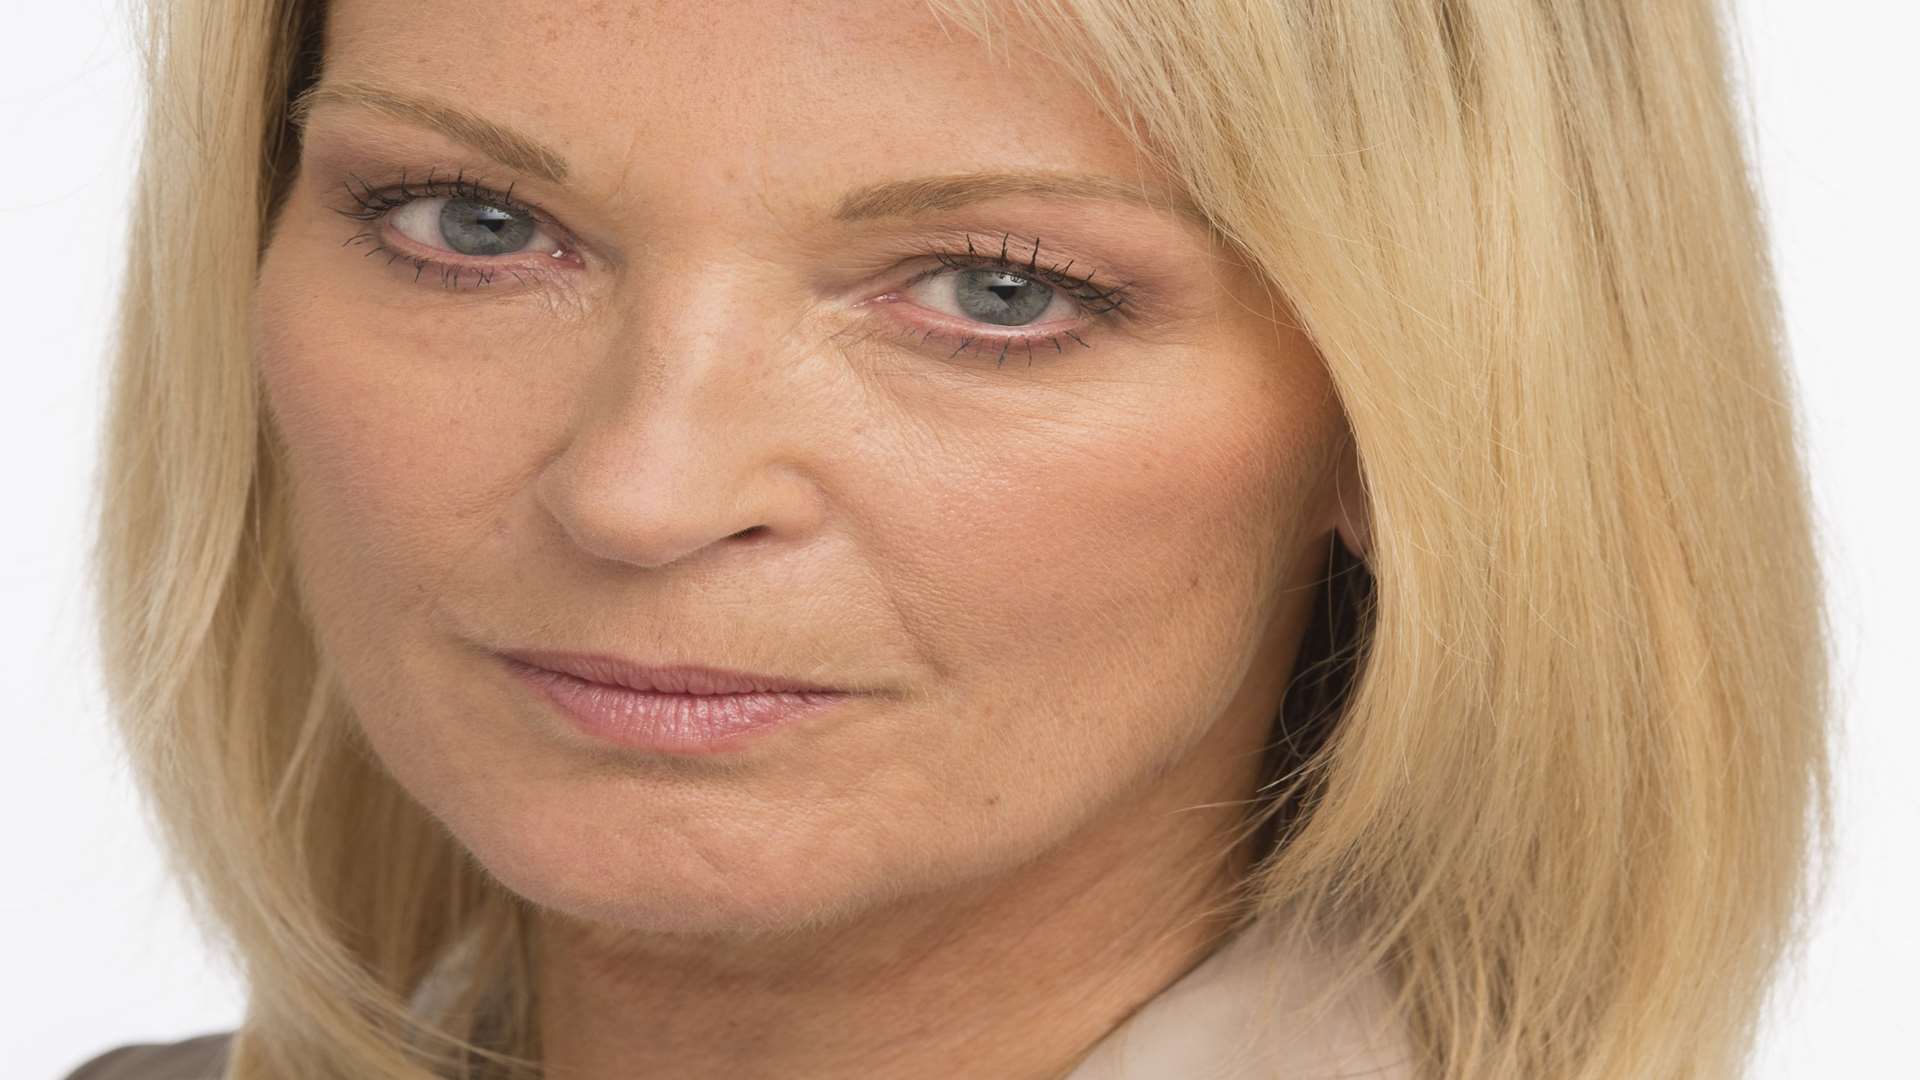 Kathy Sullivan, played by Gillian Taylforth